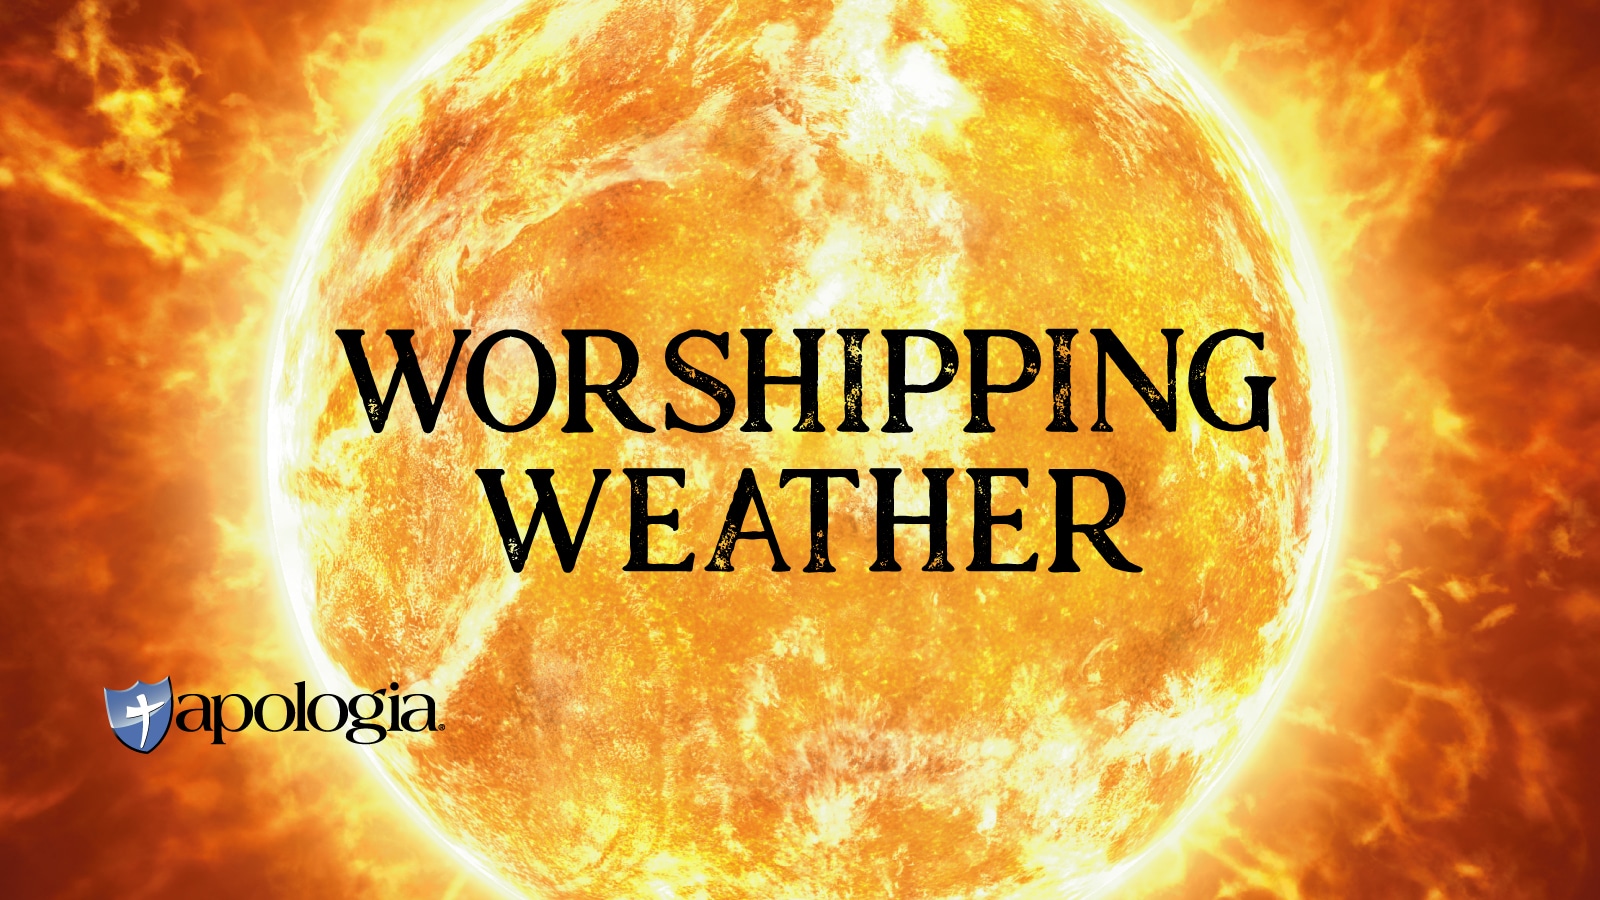 Do You Worship a Sun God? Don’t Answer Too Fast!